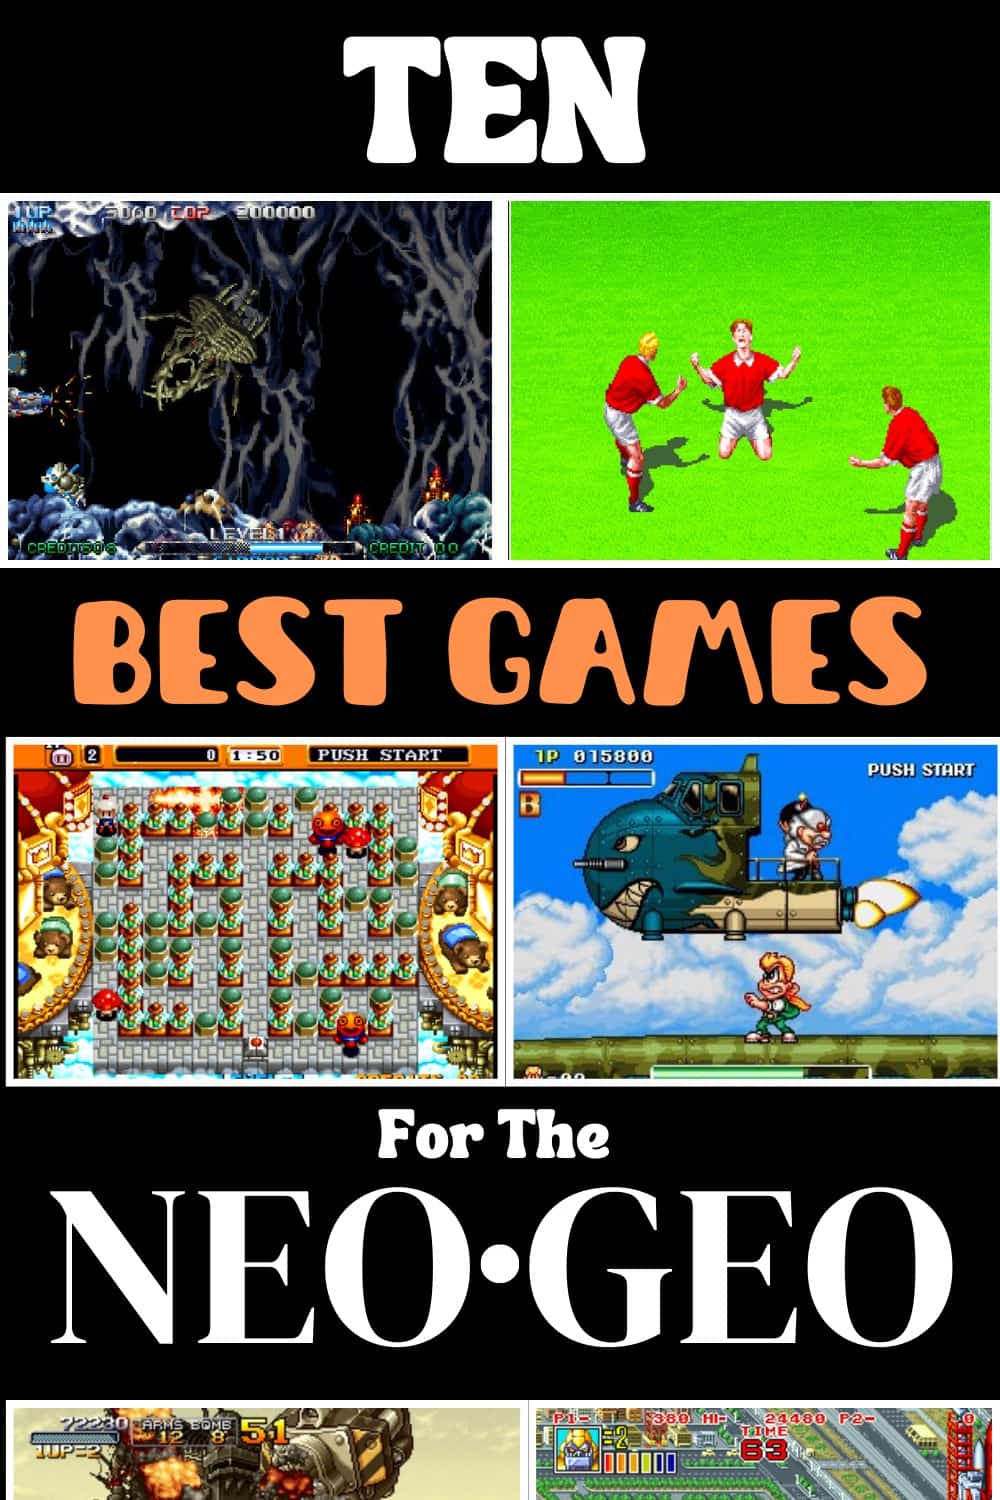 List of the best NEO GEO game